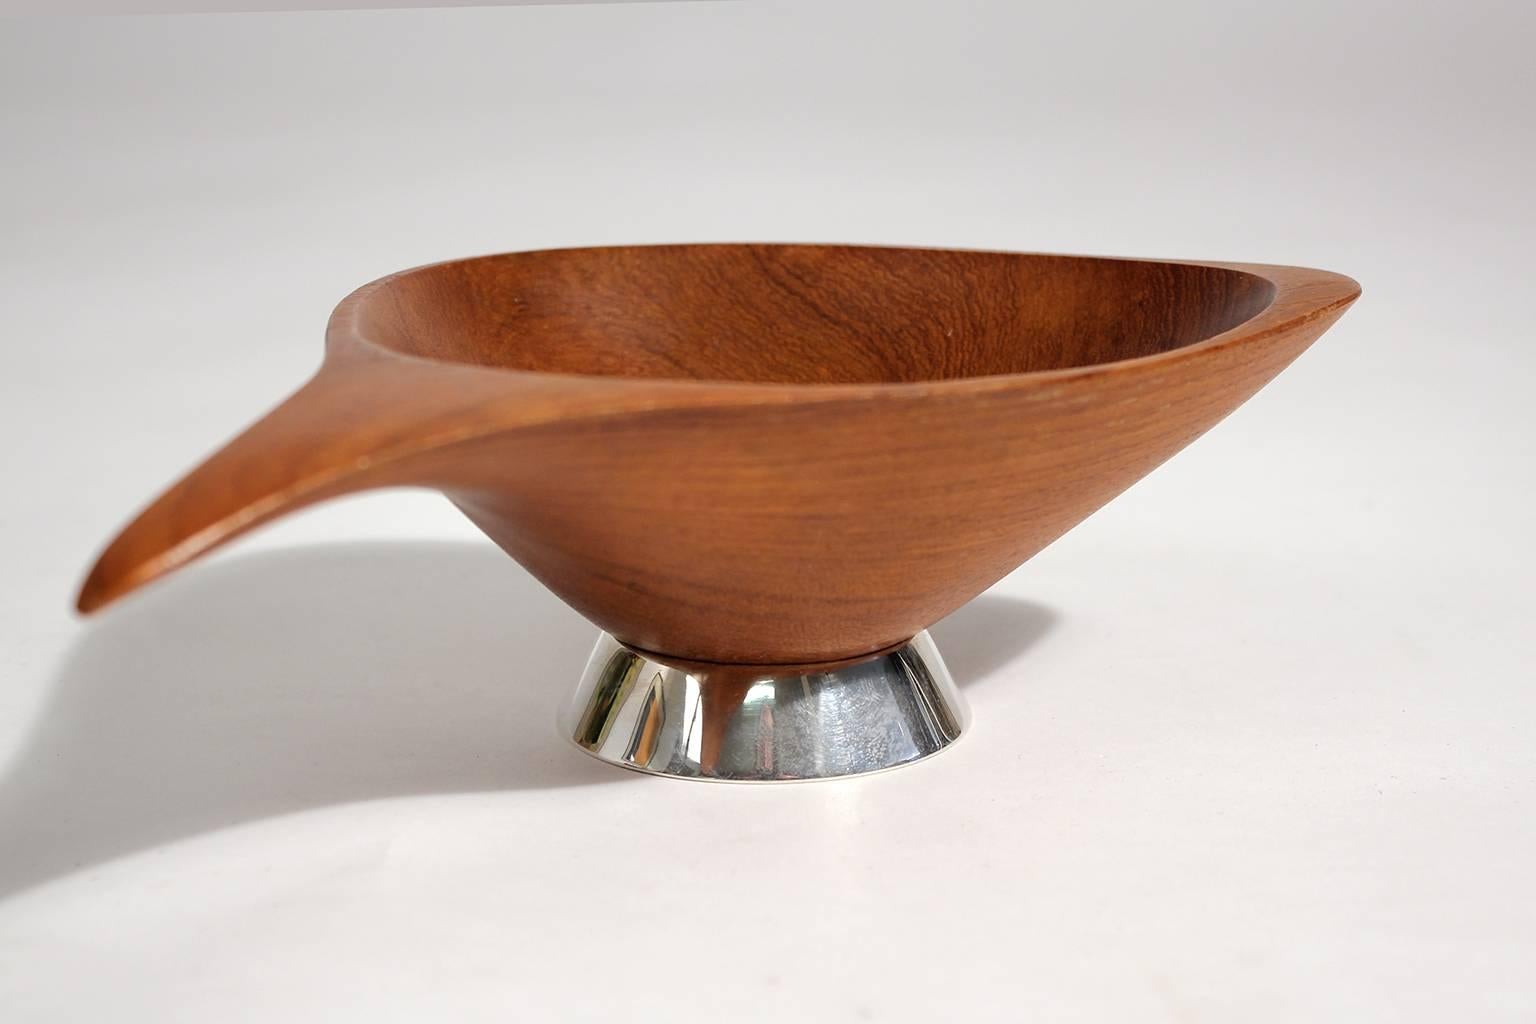 Excellent designed and handcrafted teak wood bowl by Emil Milan, circa 1960s. Great sculptural form and features an original solid sterling silver base. Great form and design. Signed on the bottom by the artist.